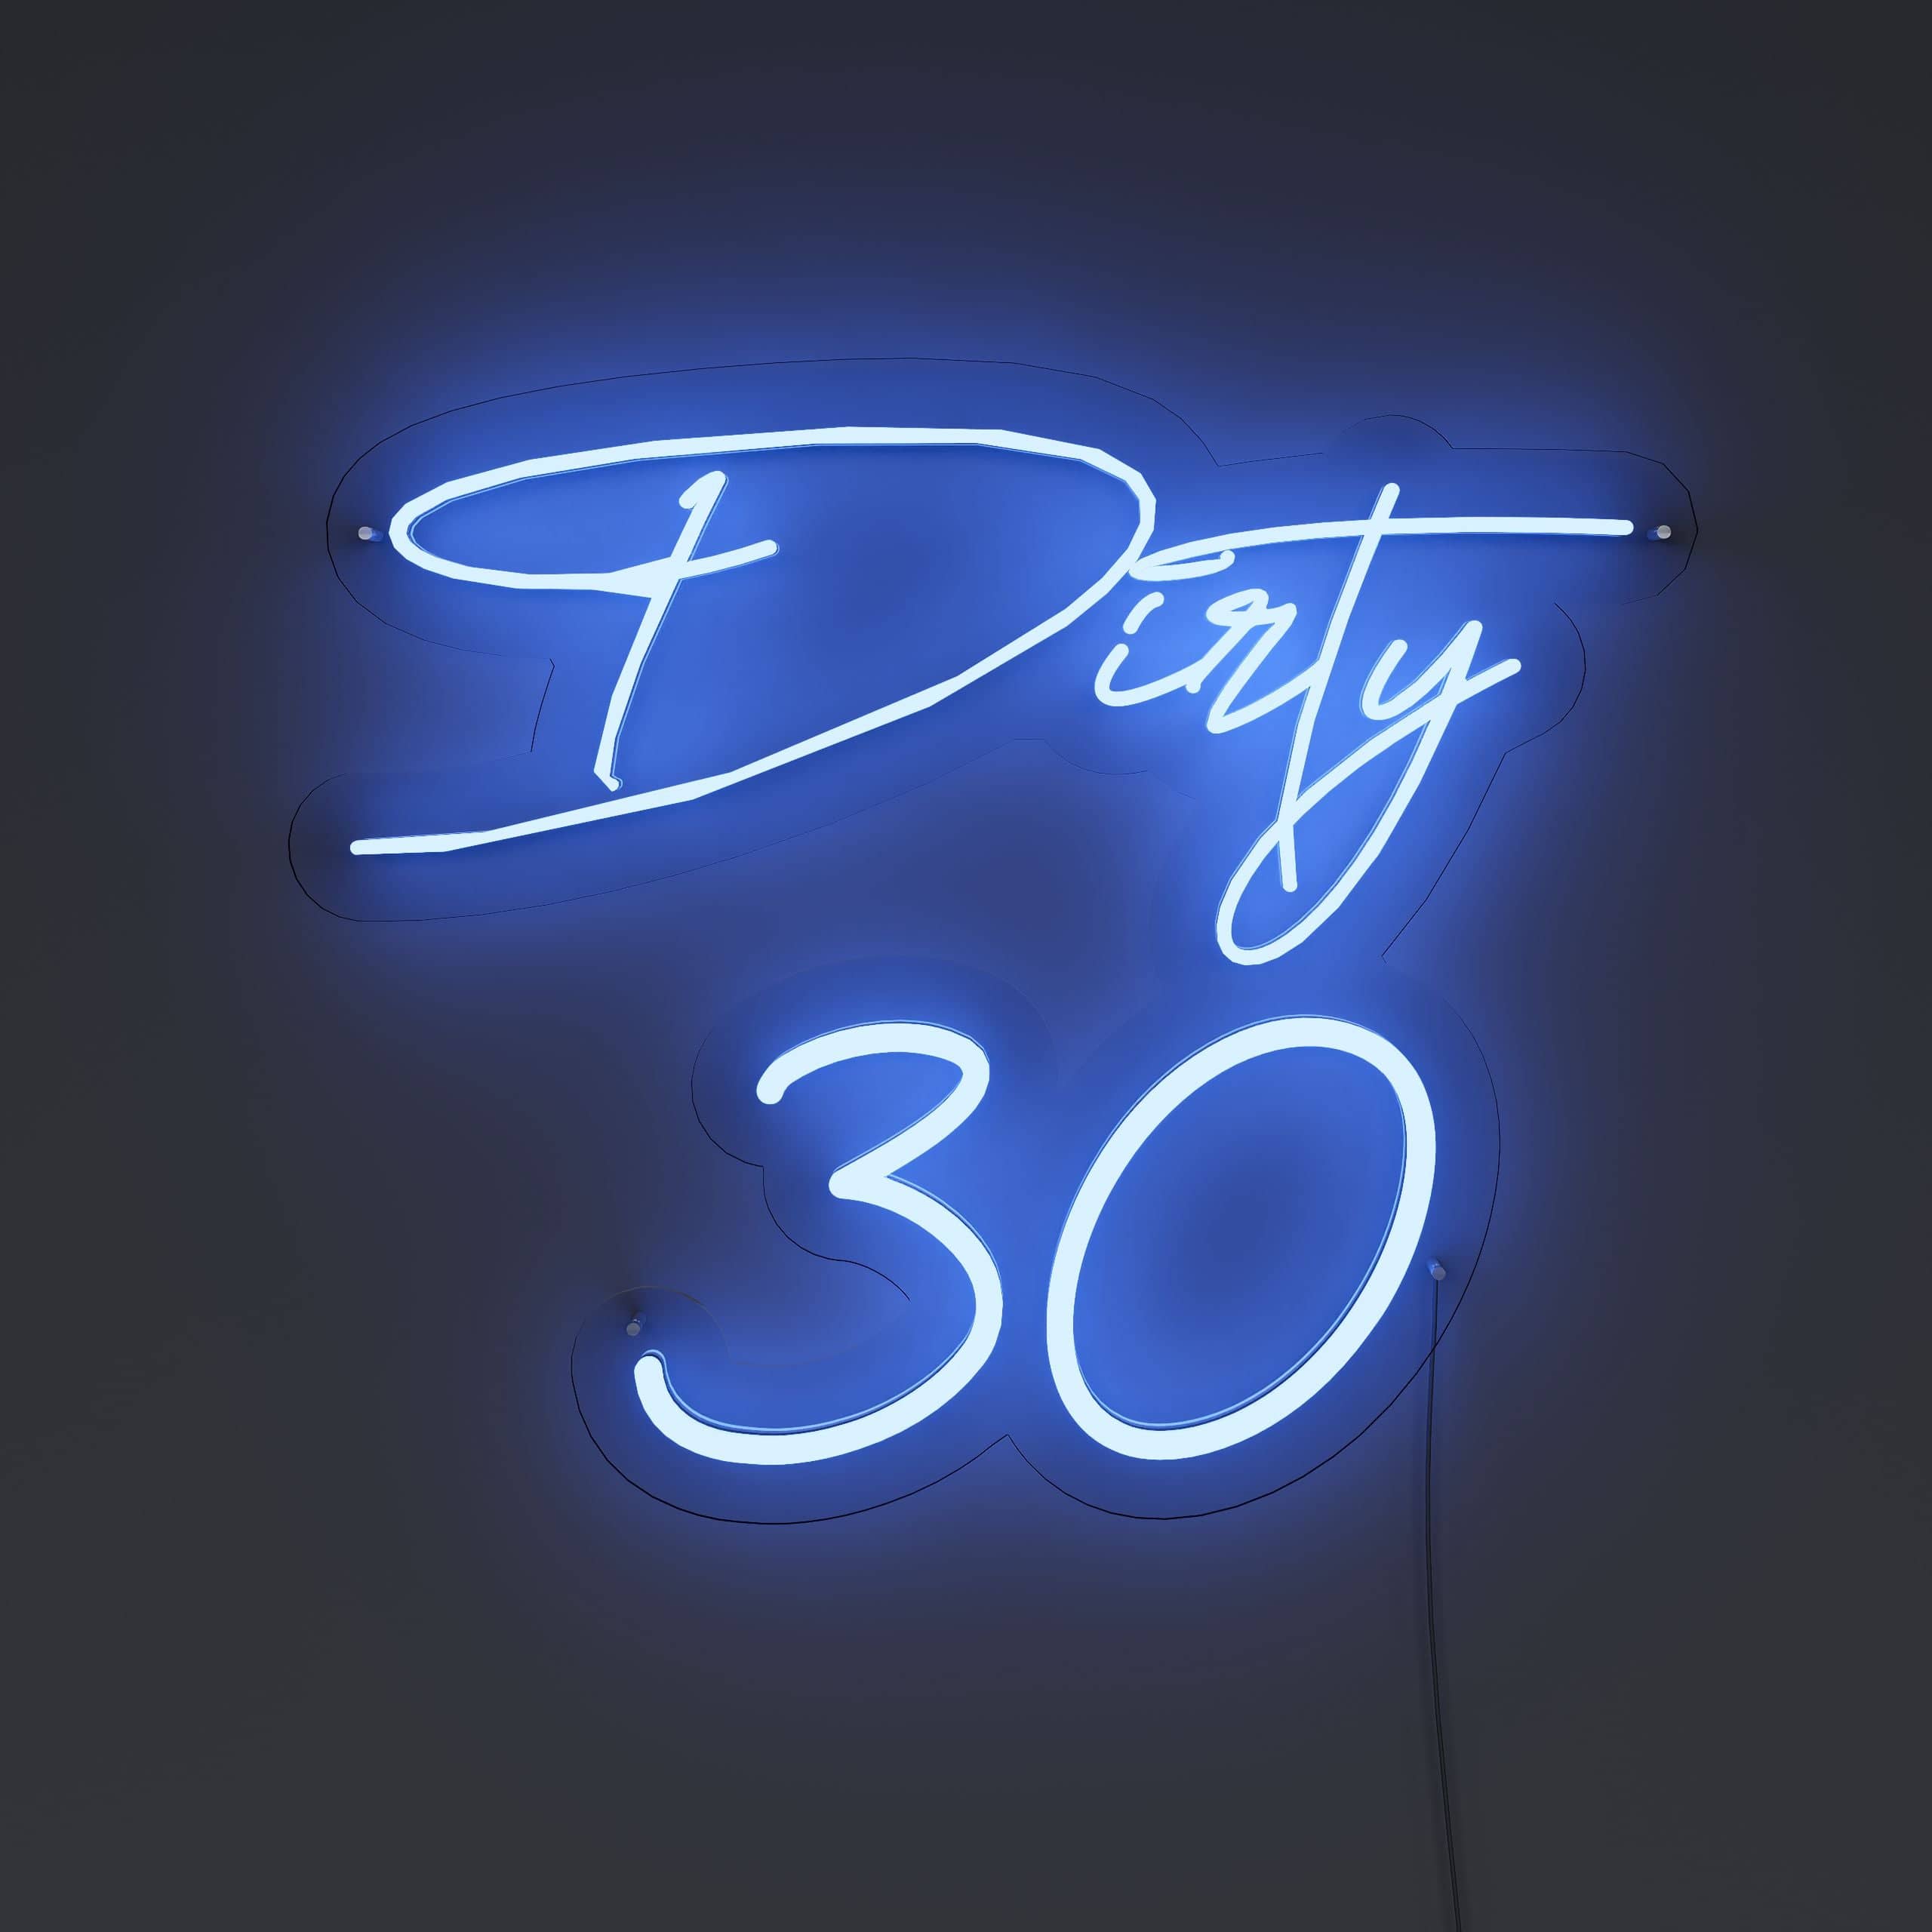 dirty-30-and-loving-it!-neon-sign-lite